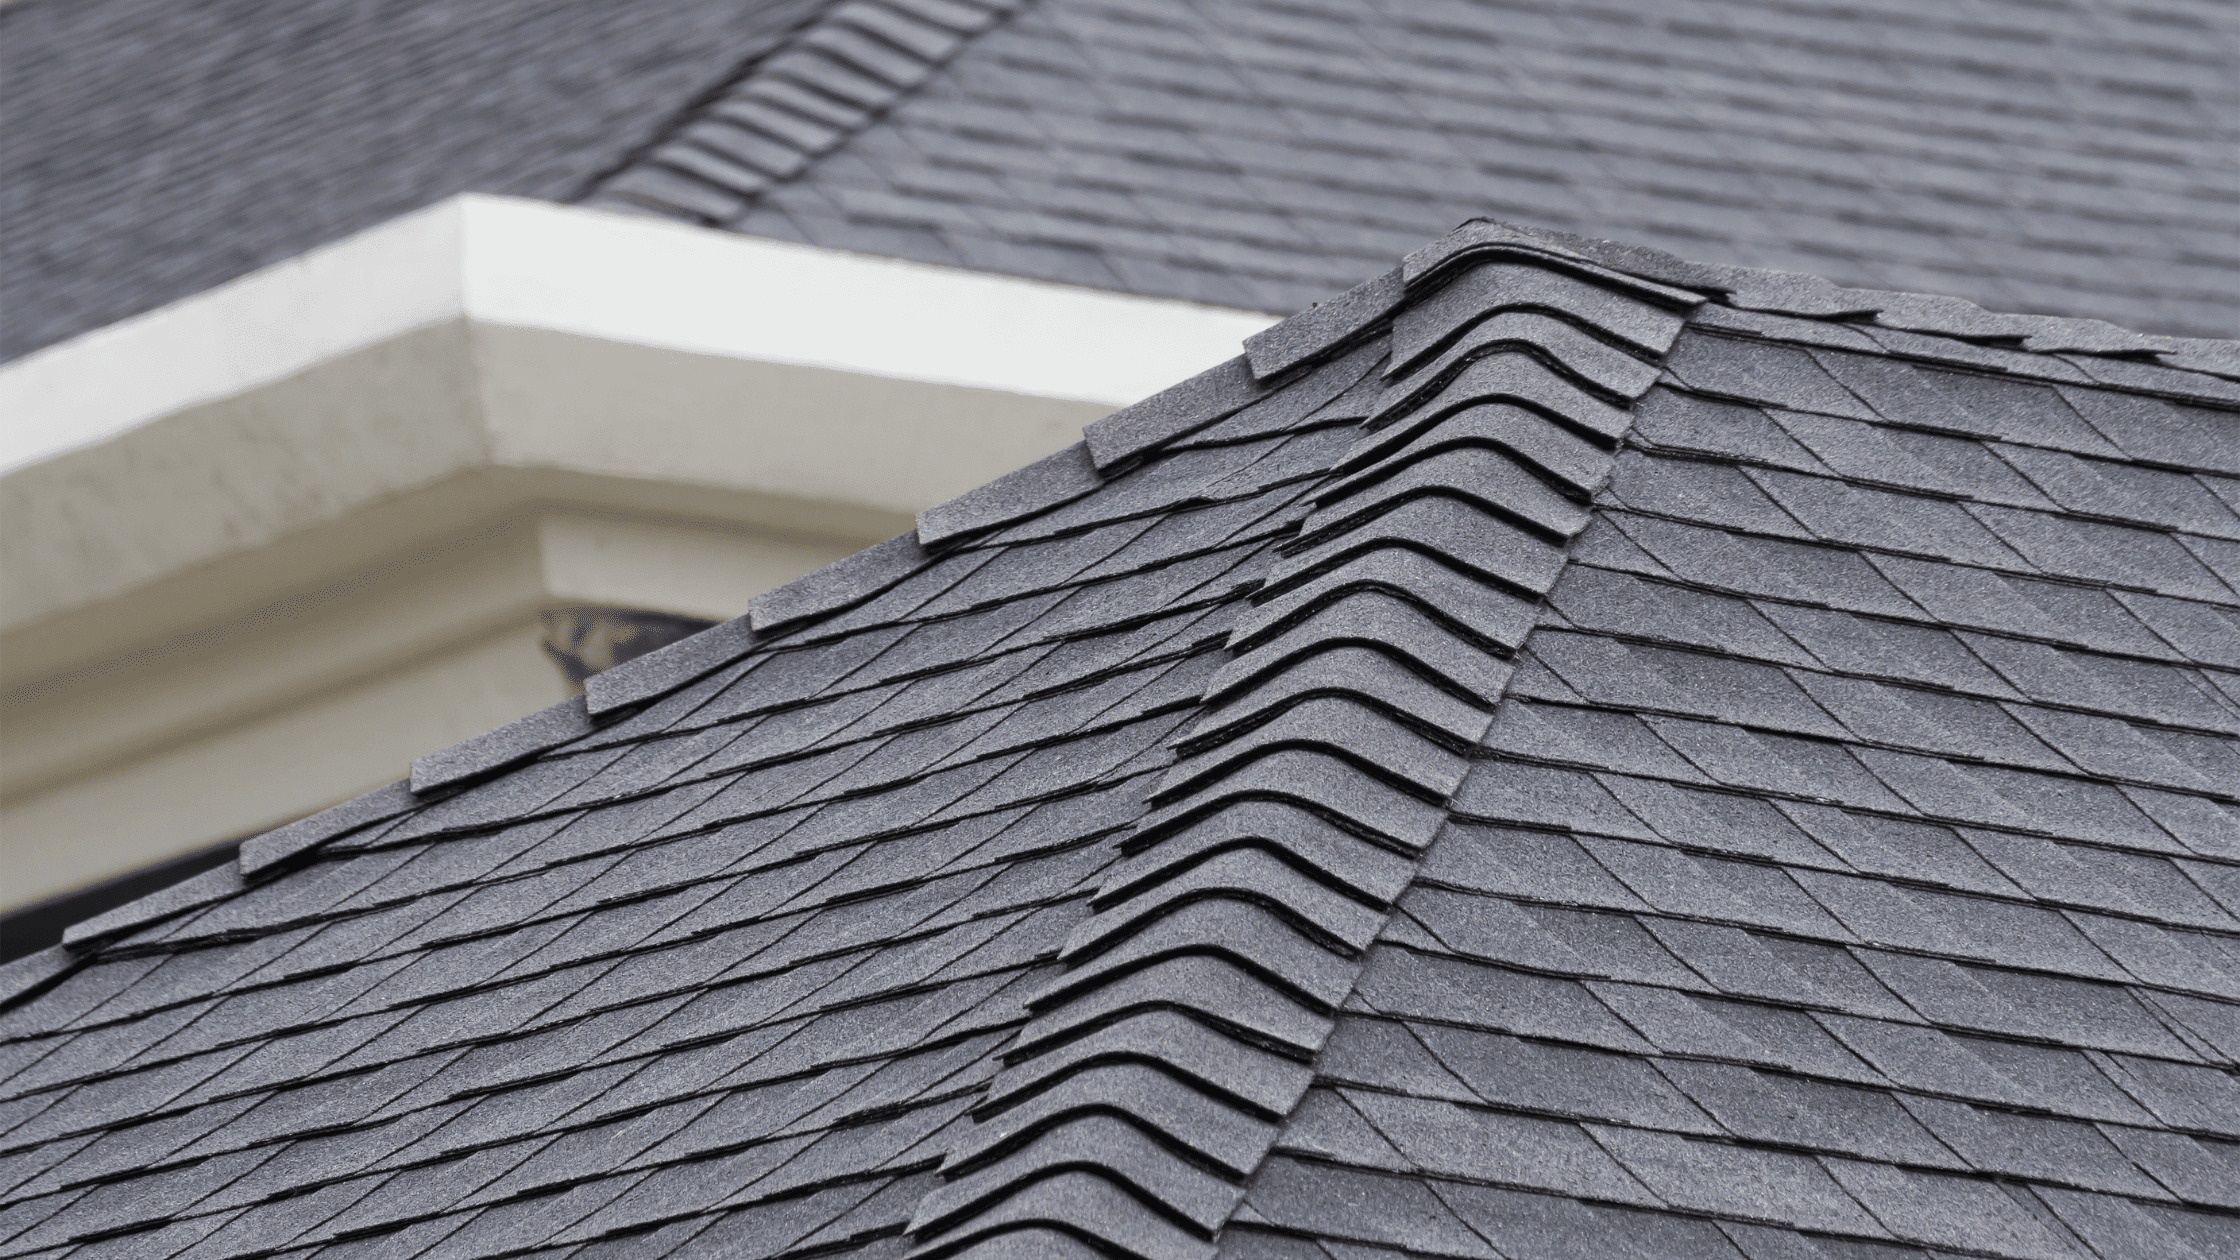 What Are Ridge Caps On A Roof And What Do They Do?